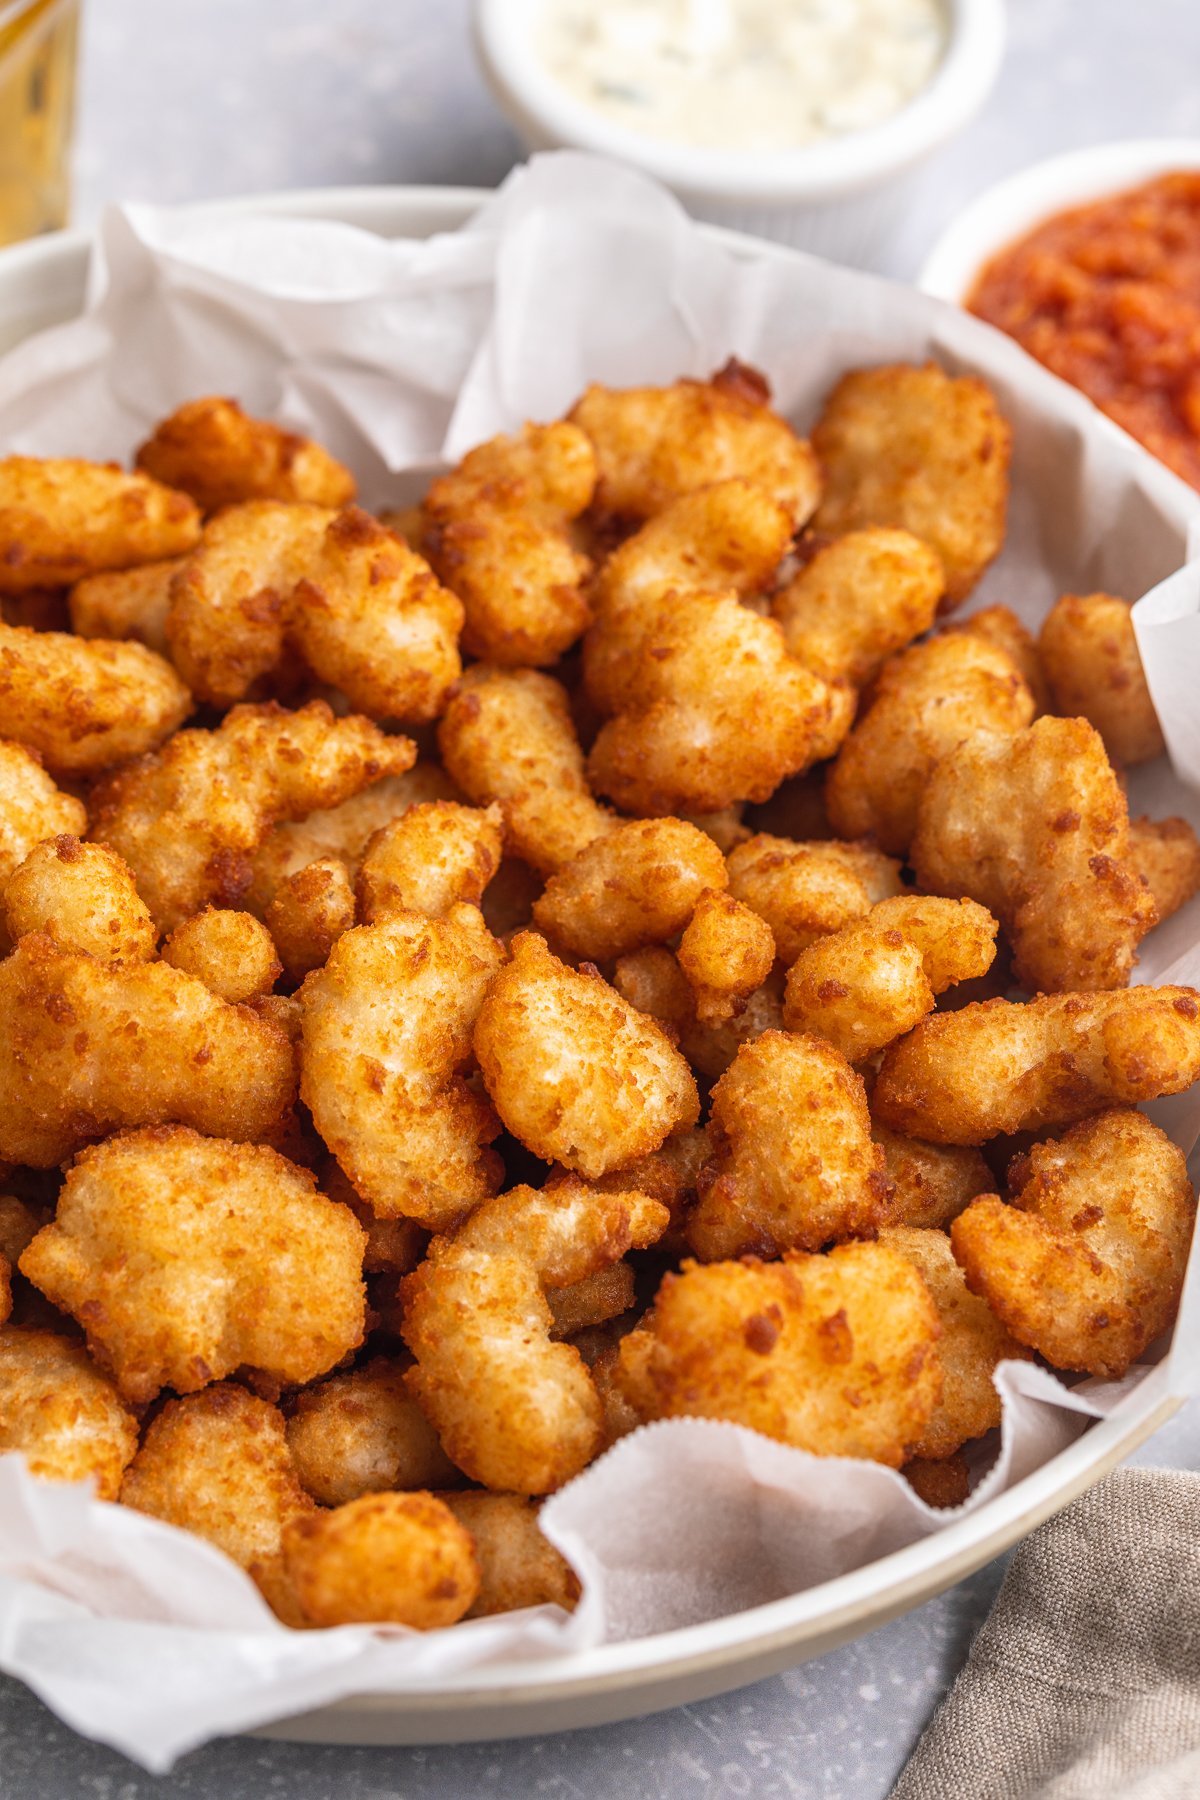 Overhead, angled photo showing a large white bowl filled with air fryer popcorn shrimp. In the background are ramekins of tartar sauce and ketchup.